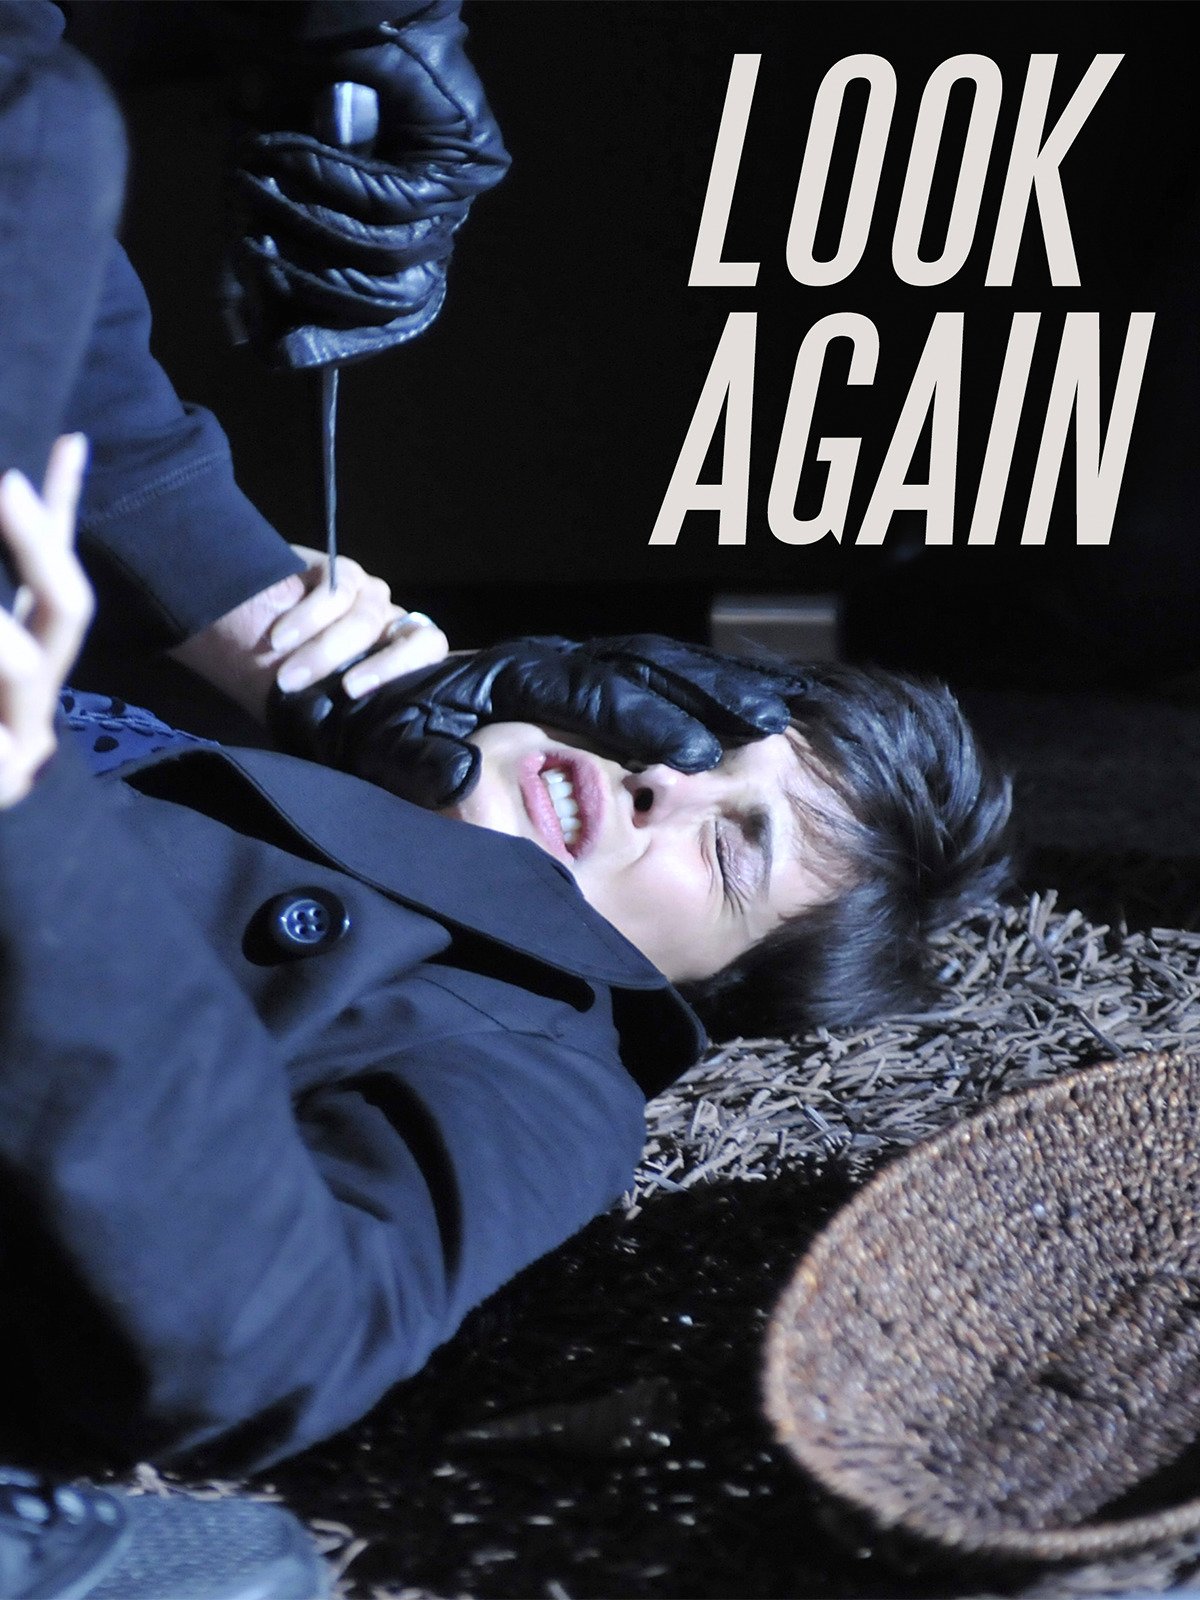 Look Again (2011) starring Morena Baccarin on DVD on DVD